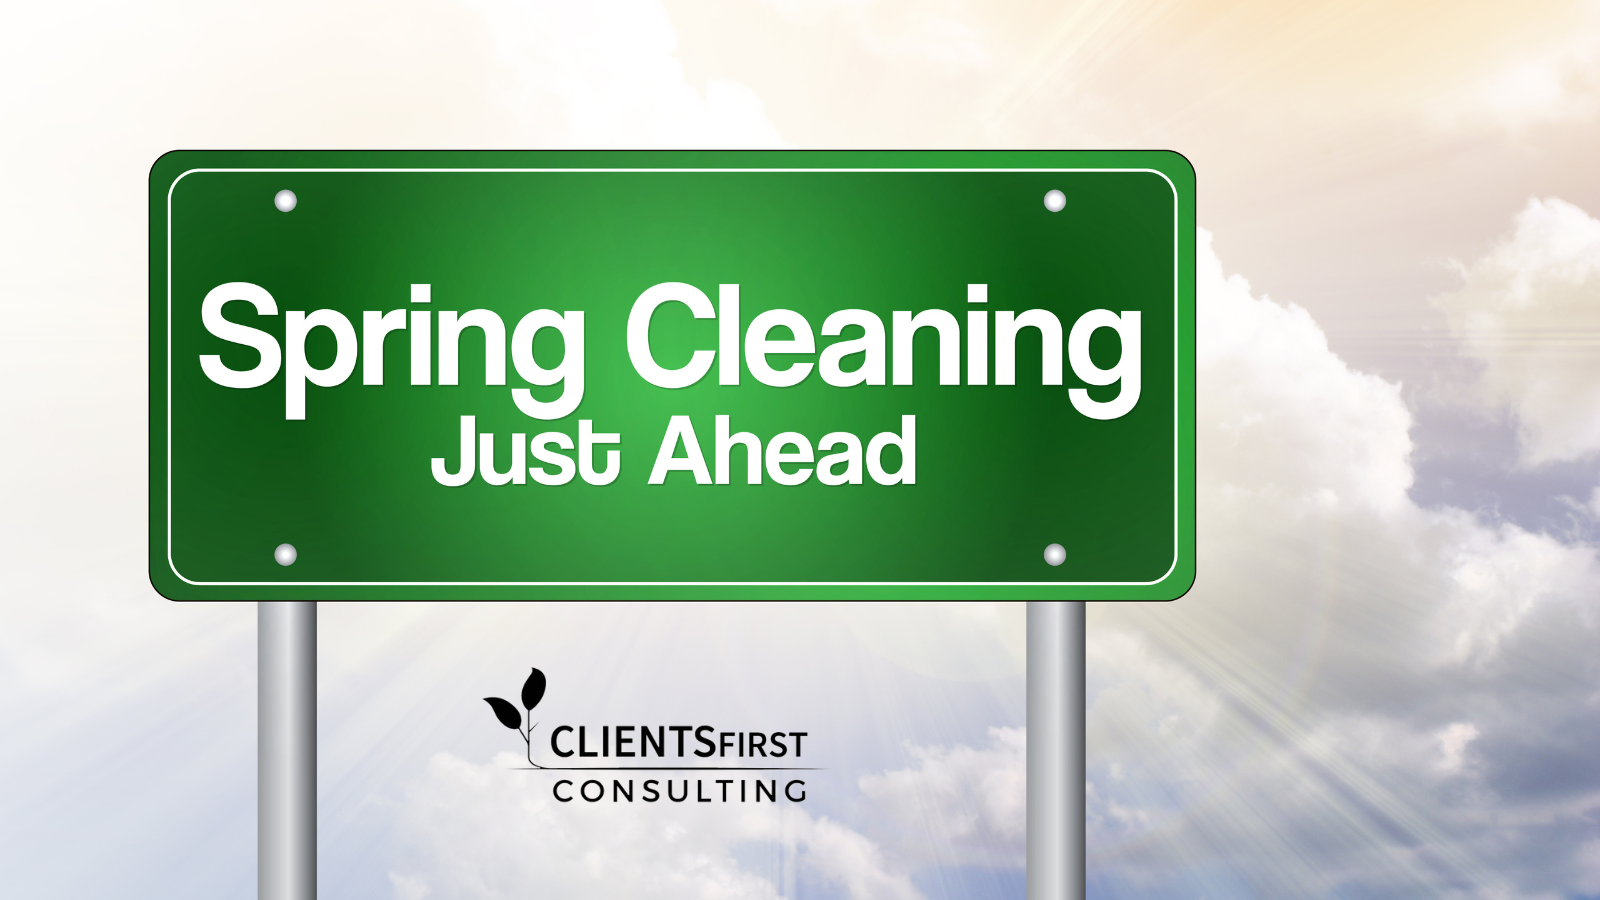 10 Ways To Spring Clean Your CRM System